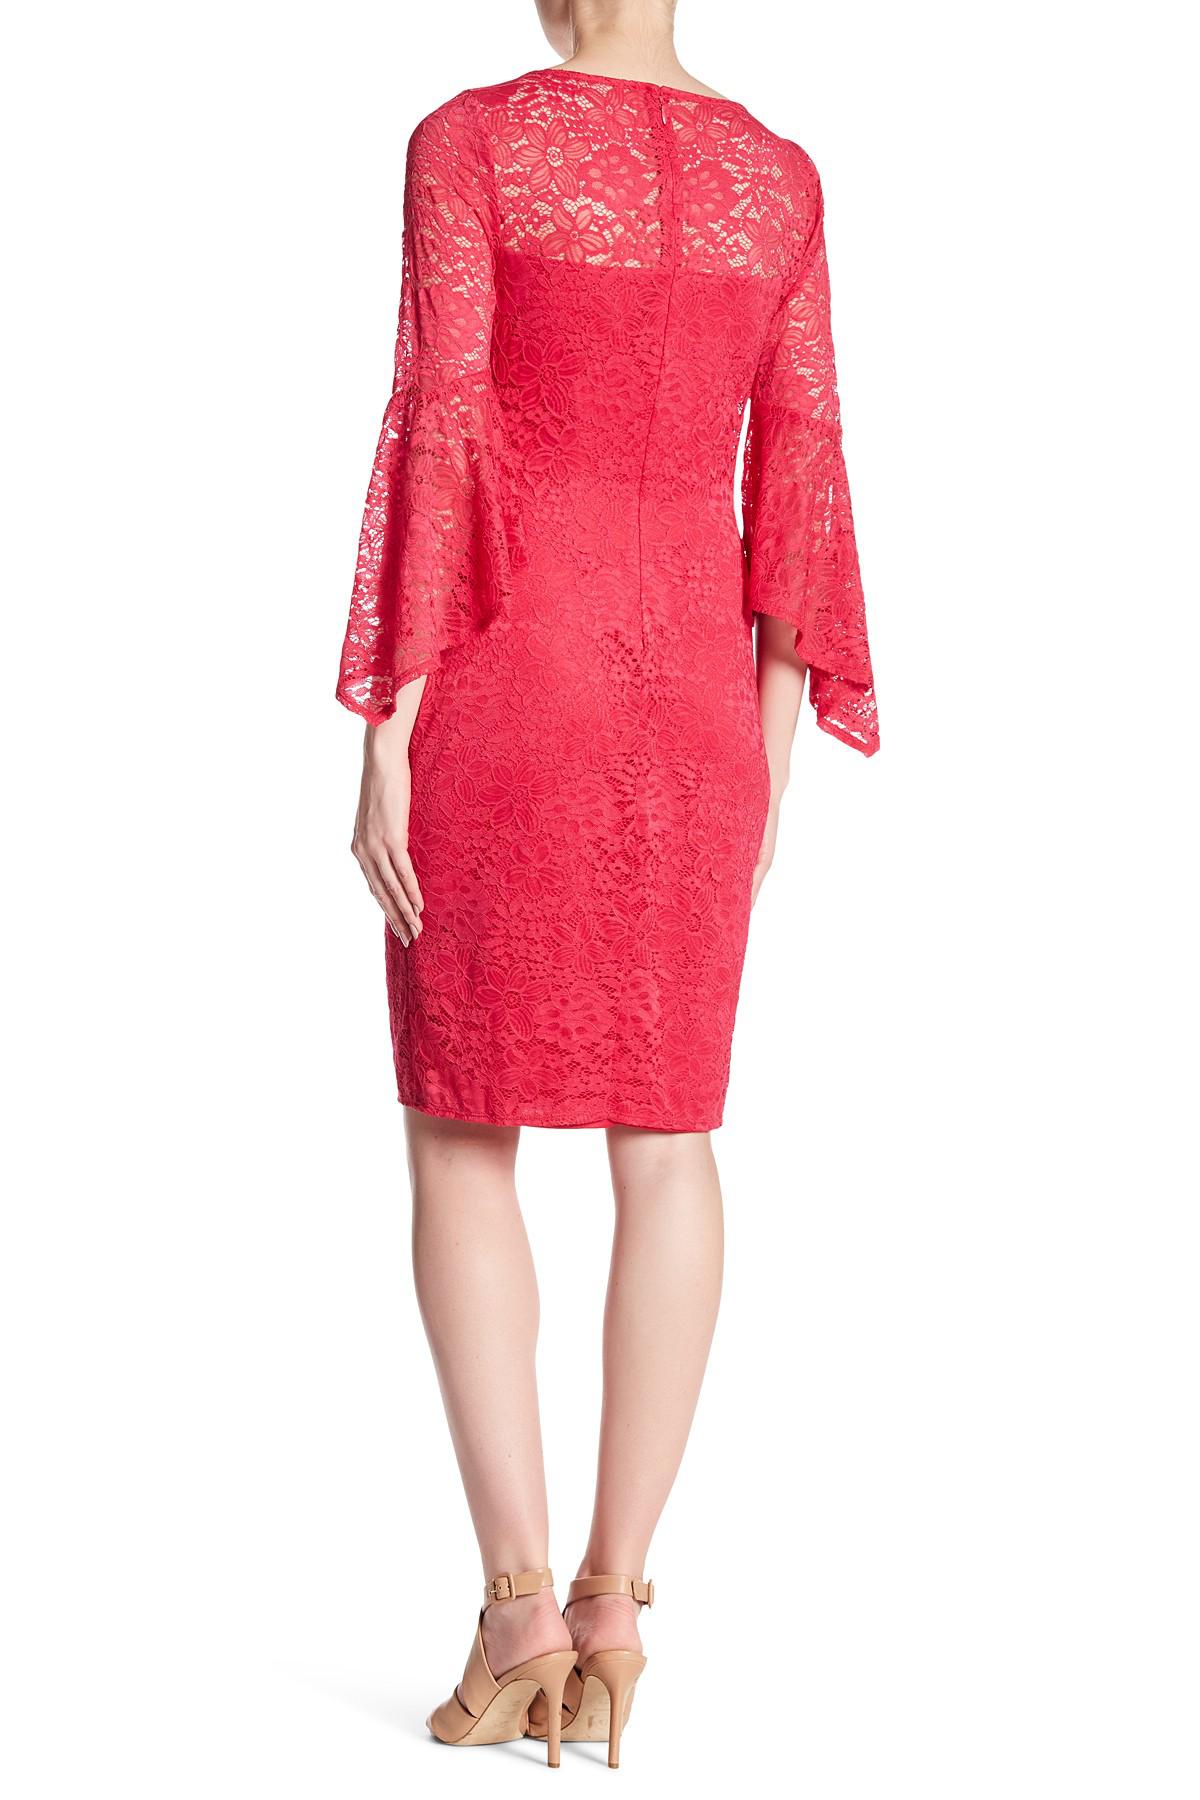 Lyst - Laundry By Shelli Segal Bell Sleeve Stretch Lace Cocktail Dress ...